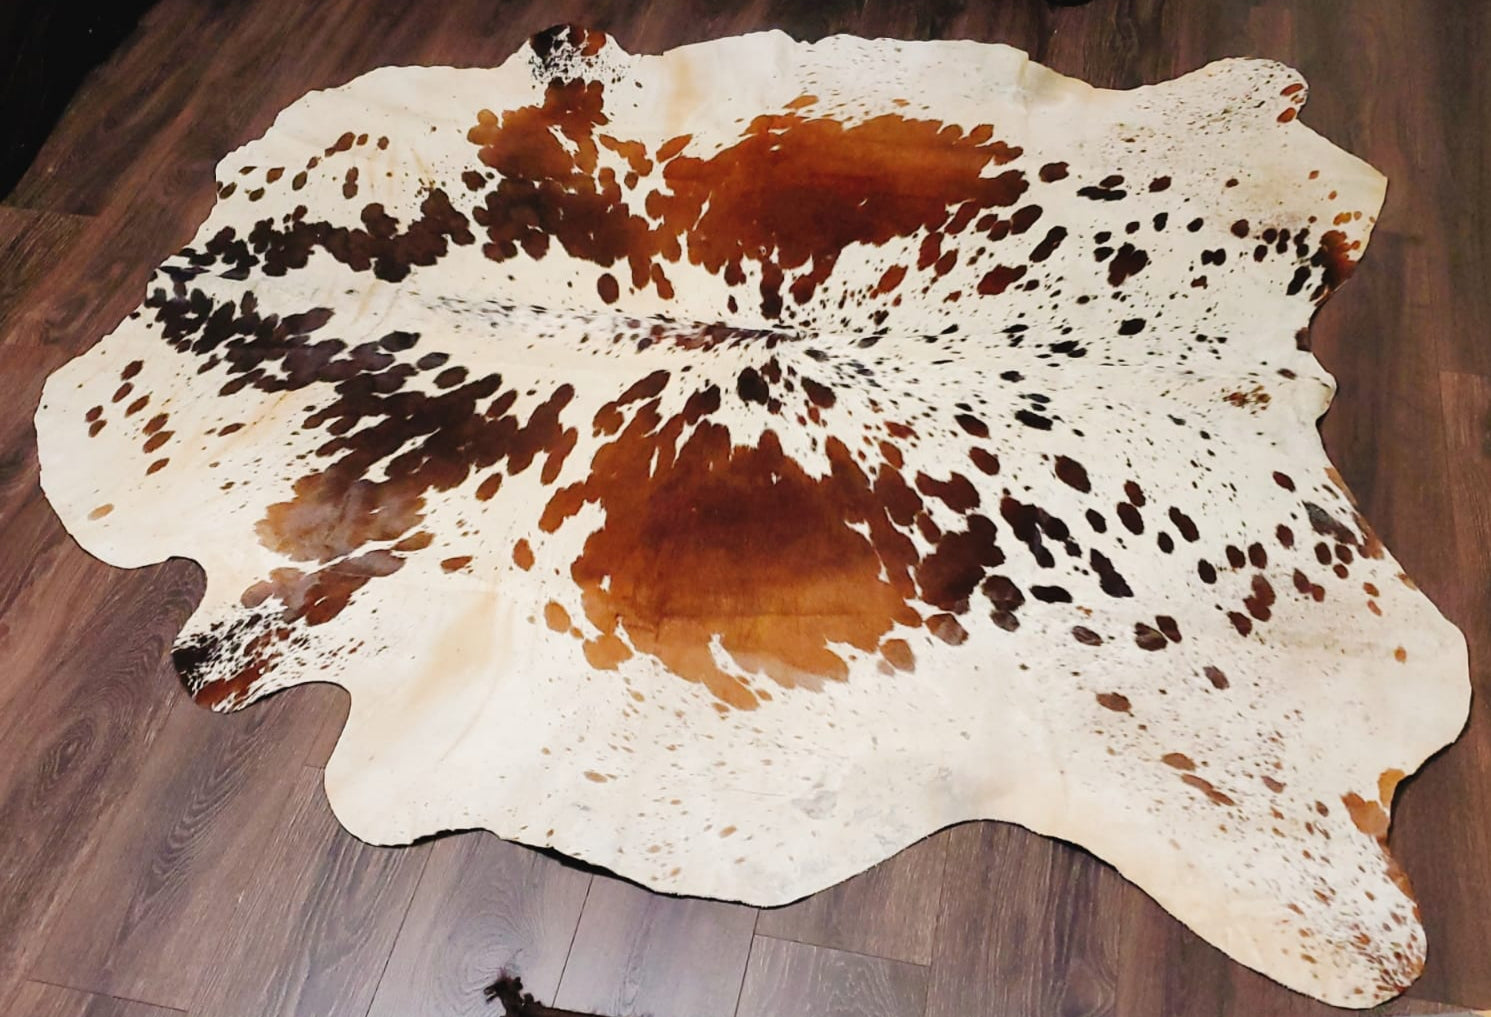 Real Tricolor Cow Skin Area Rug Hair on Leather Hide 6.5 ft X 6.5 ft - 45 x 45 sq.ft Approx. Multicolor Led Lights, Motion Sensor, USB & Battery Power Option